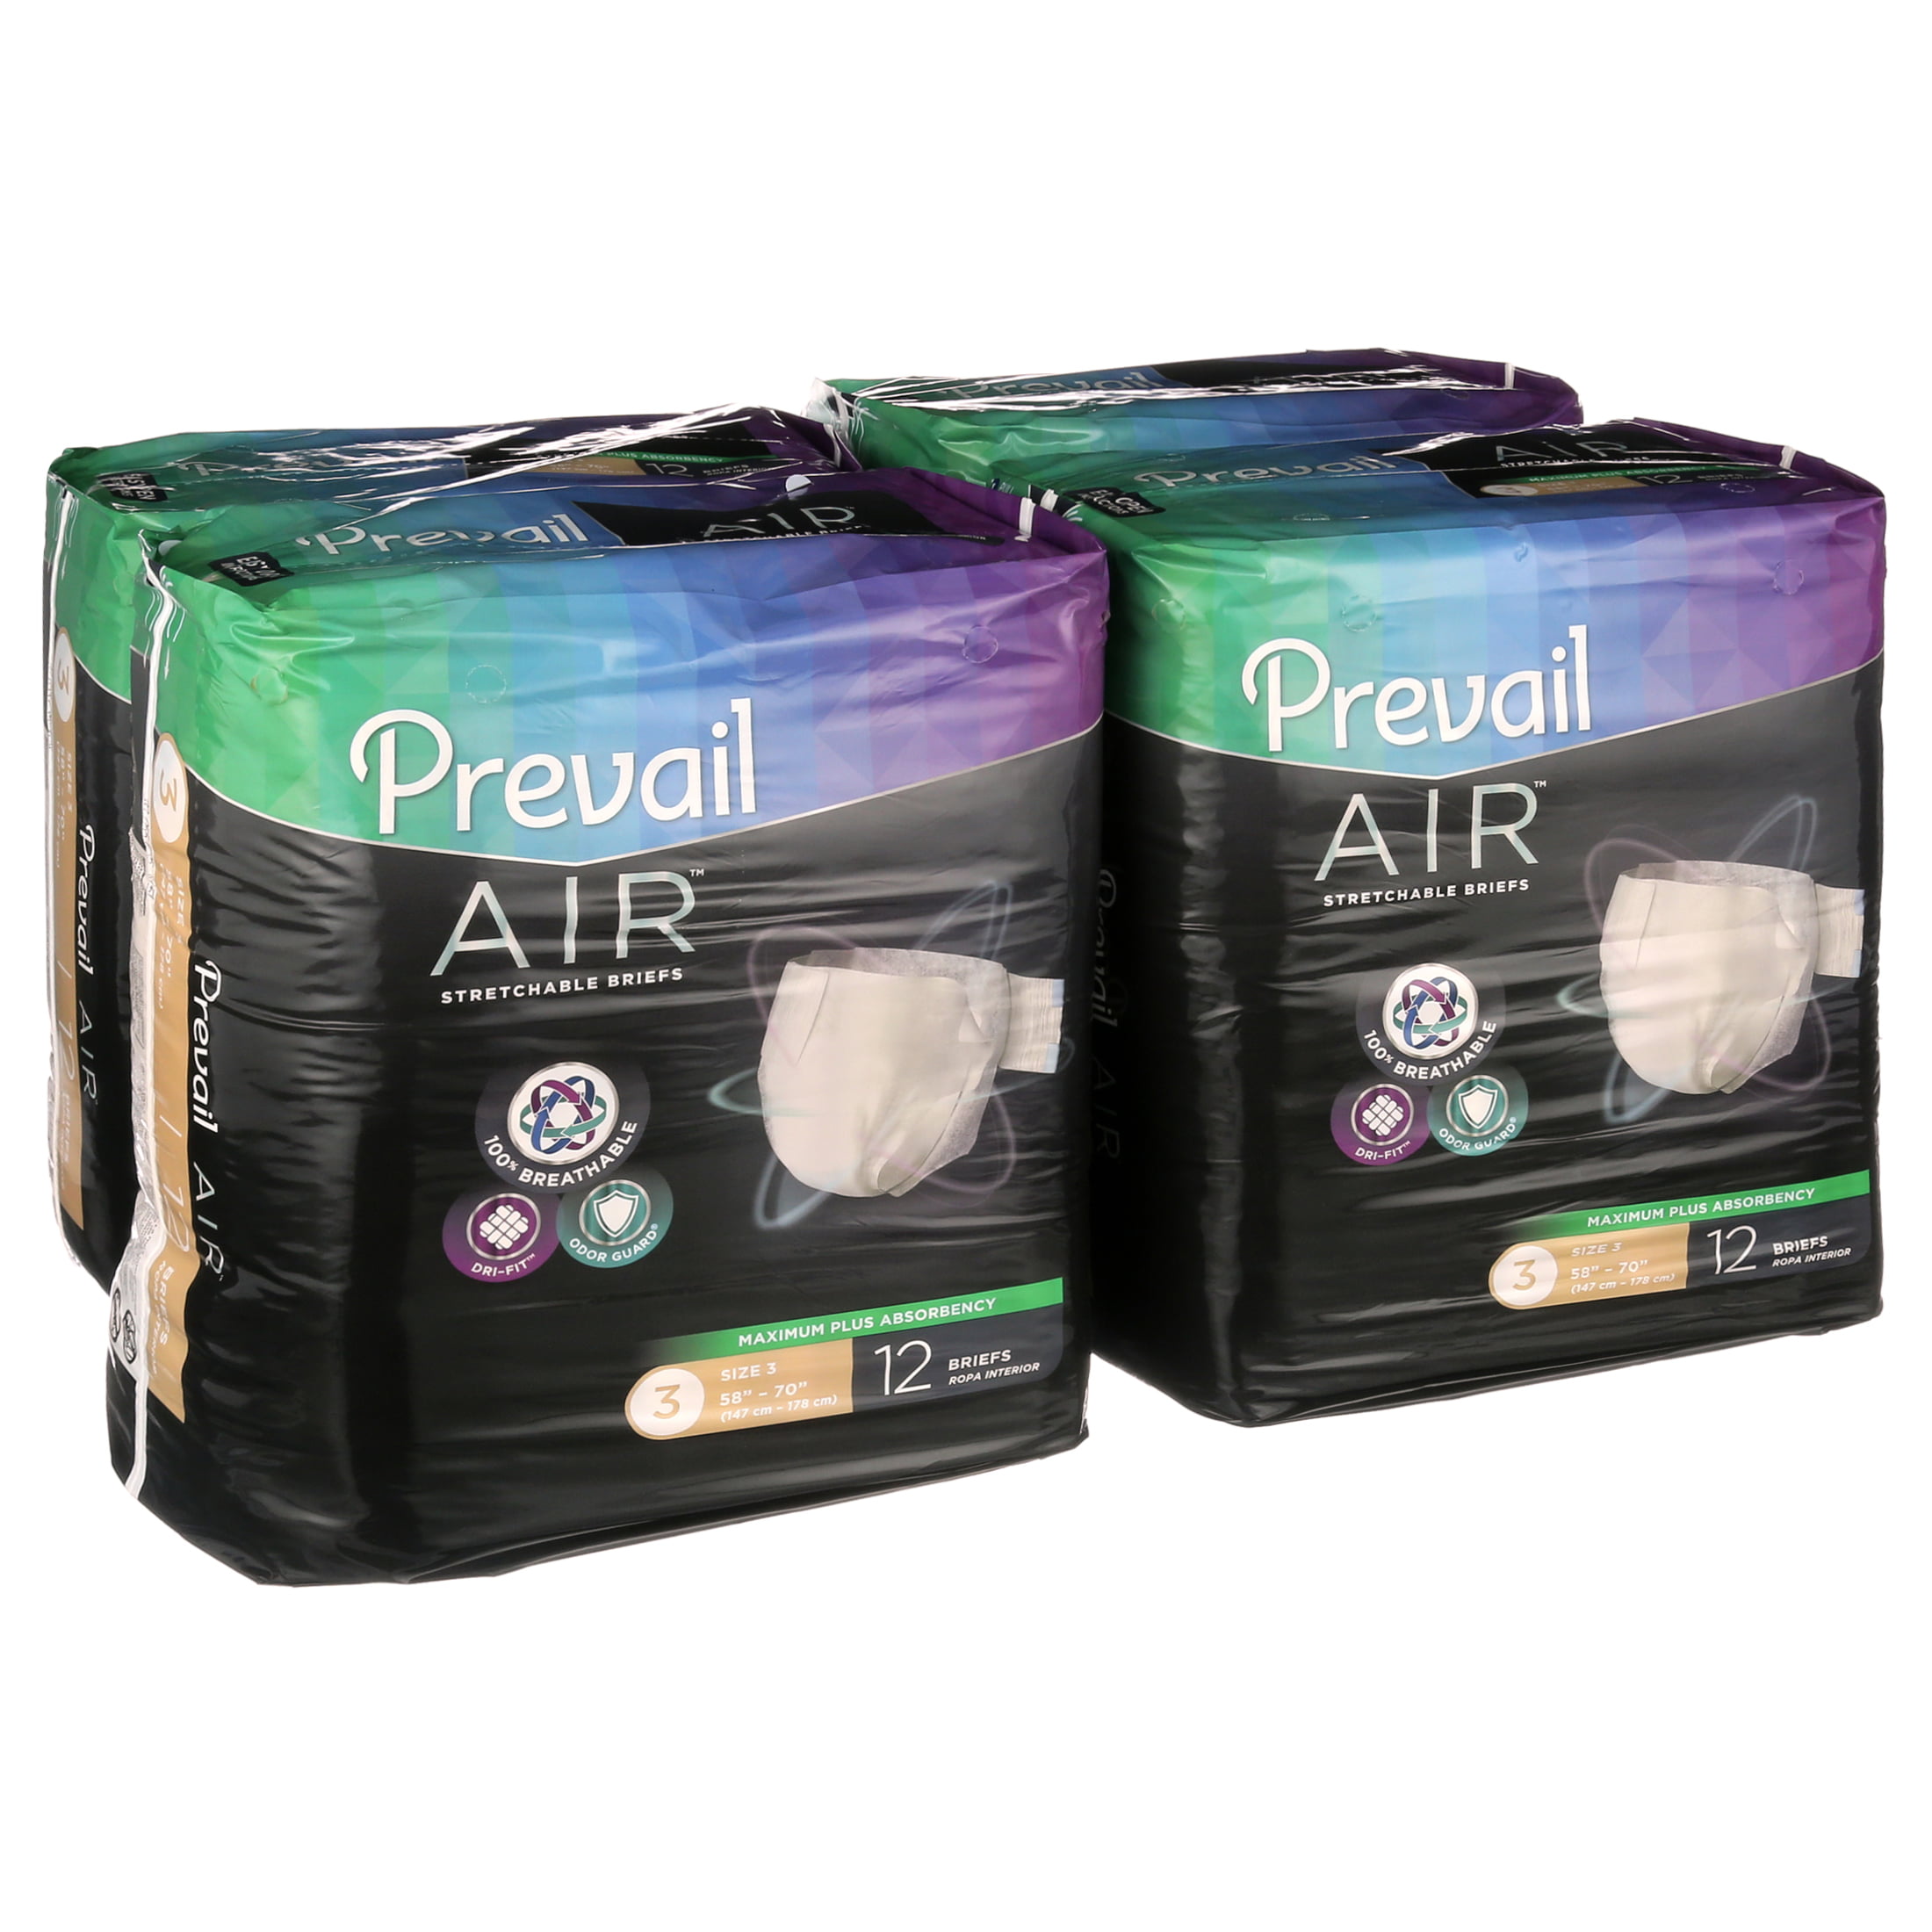 Prevail Air Maximum Plus Absorbency Stretchable Incontinence Briefs / Adult  Diapers, Size 3, 48 Count 